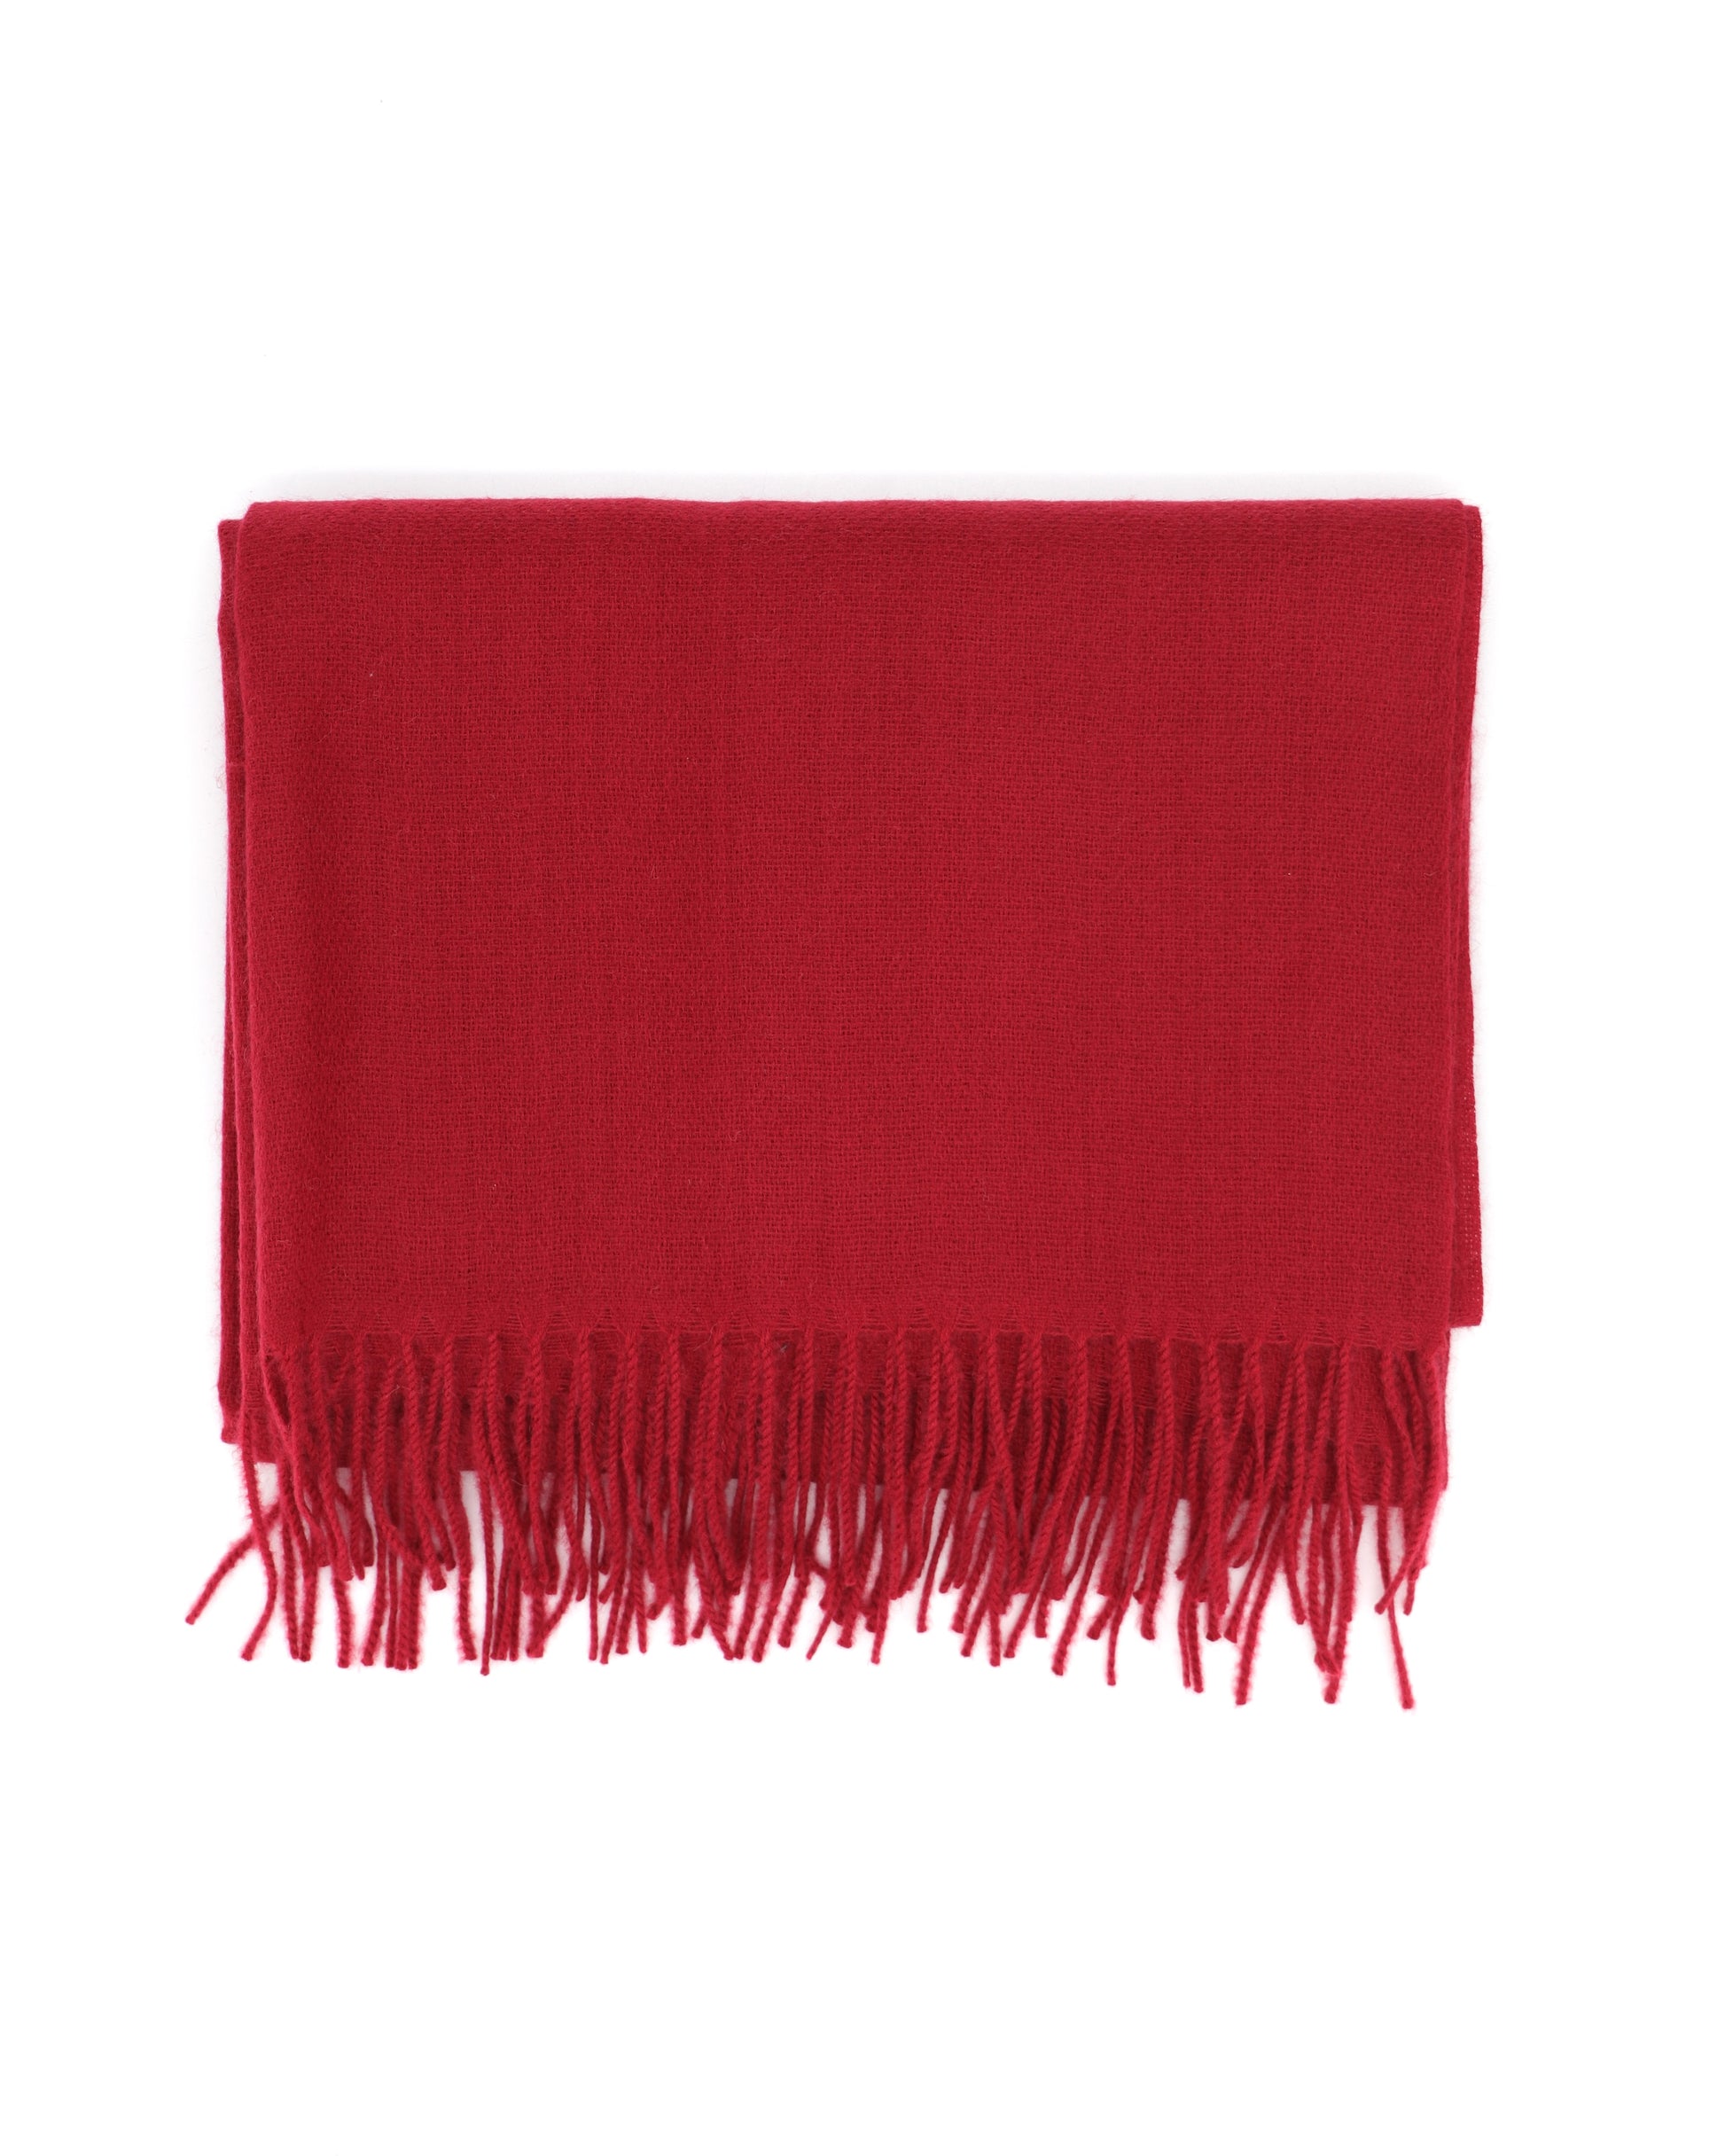 Soft Wool and Cashmere Scarf - Burgundy Red - Scarf Designers